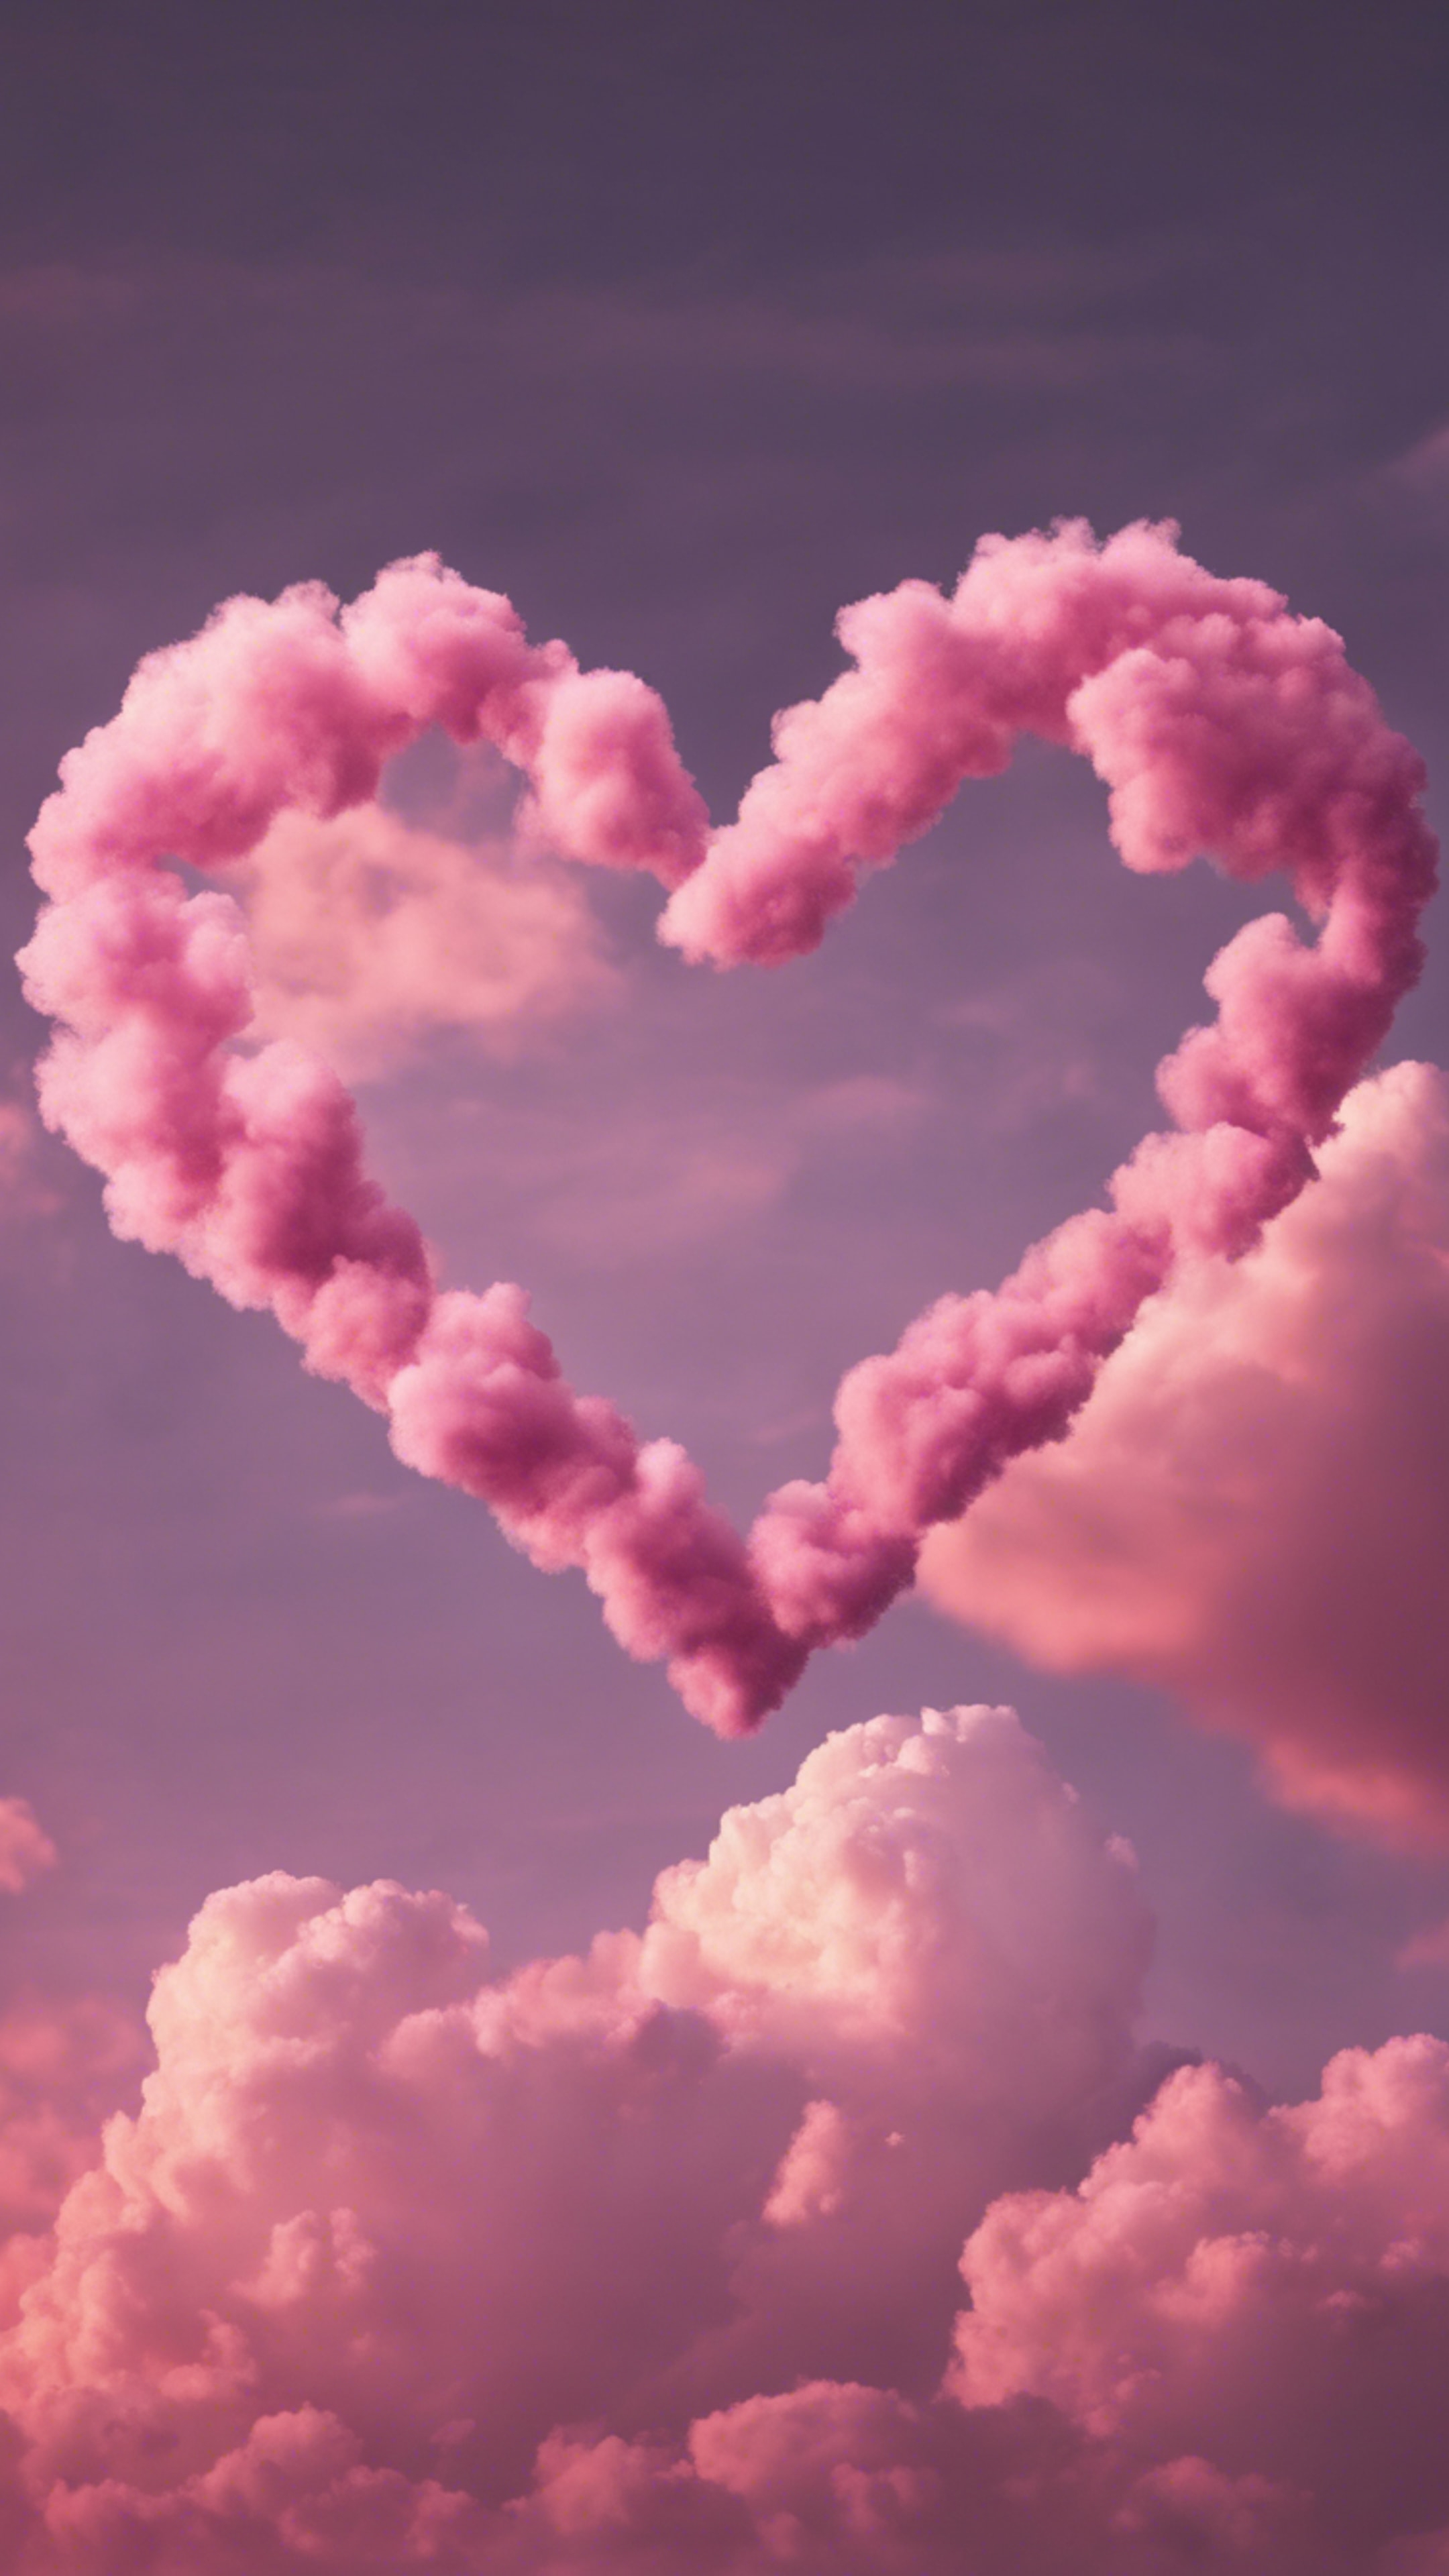 Pink heart-shaped clouds floating in the twilight sky.壁紙[eb6690dc48484c9aa4c9]